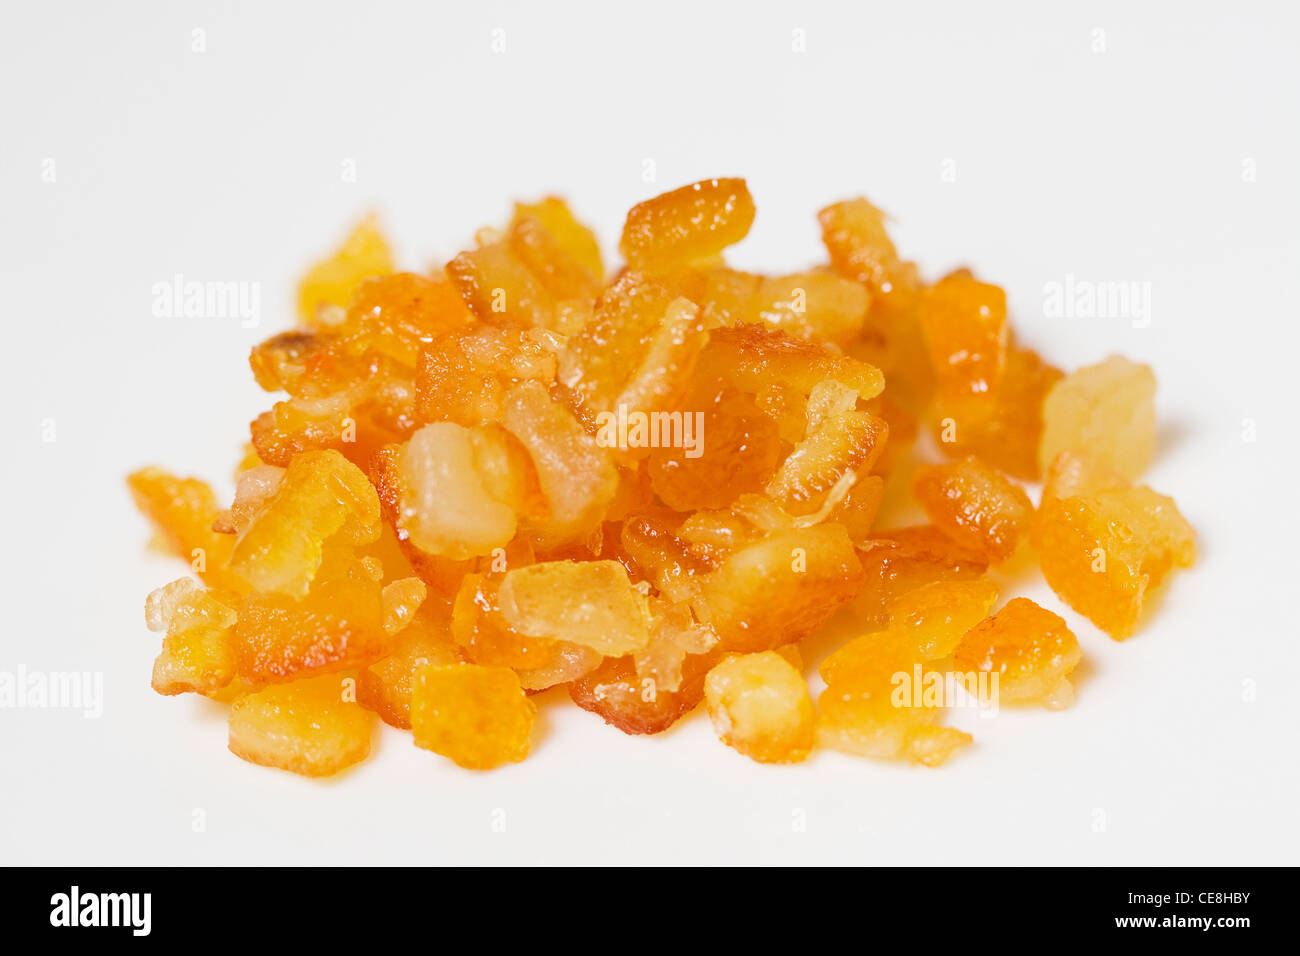 https://c8.alamy.com/comp/CE8HBY/mixed-peel-CE8HBY.jpg